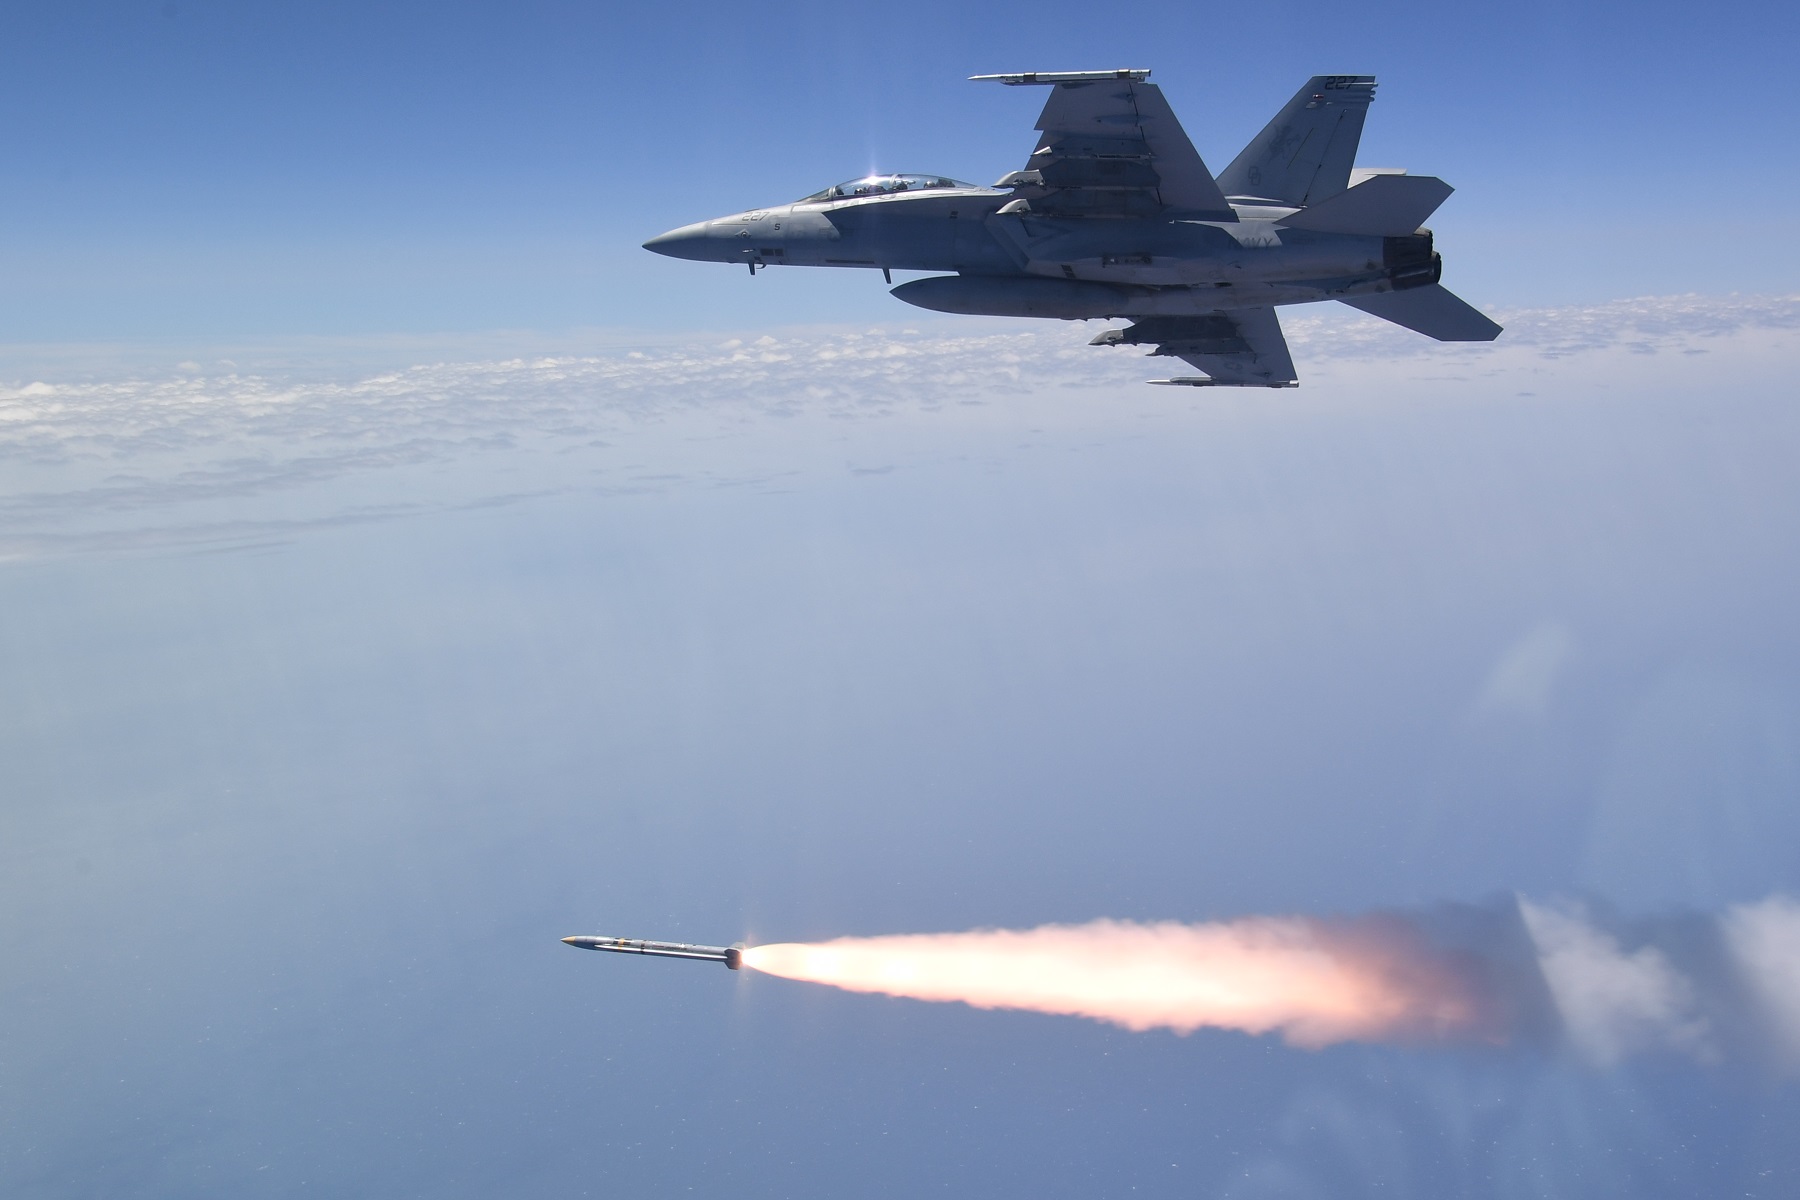 3rd Successful Missile Live Fire Test for AARGM-ER - Naval News